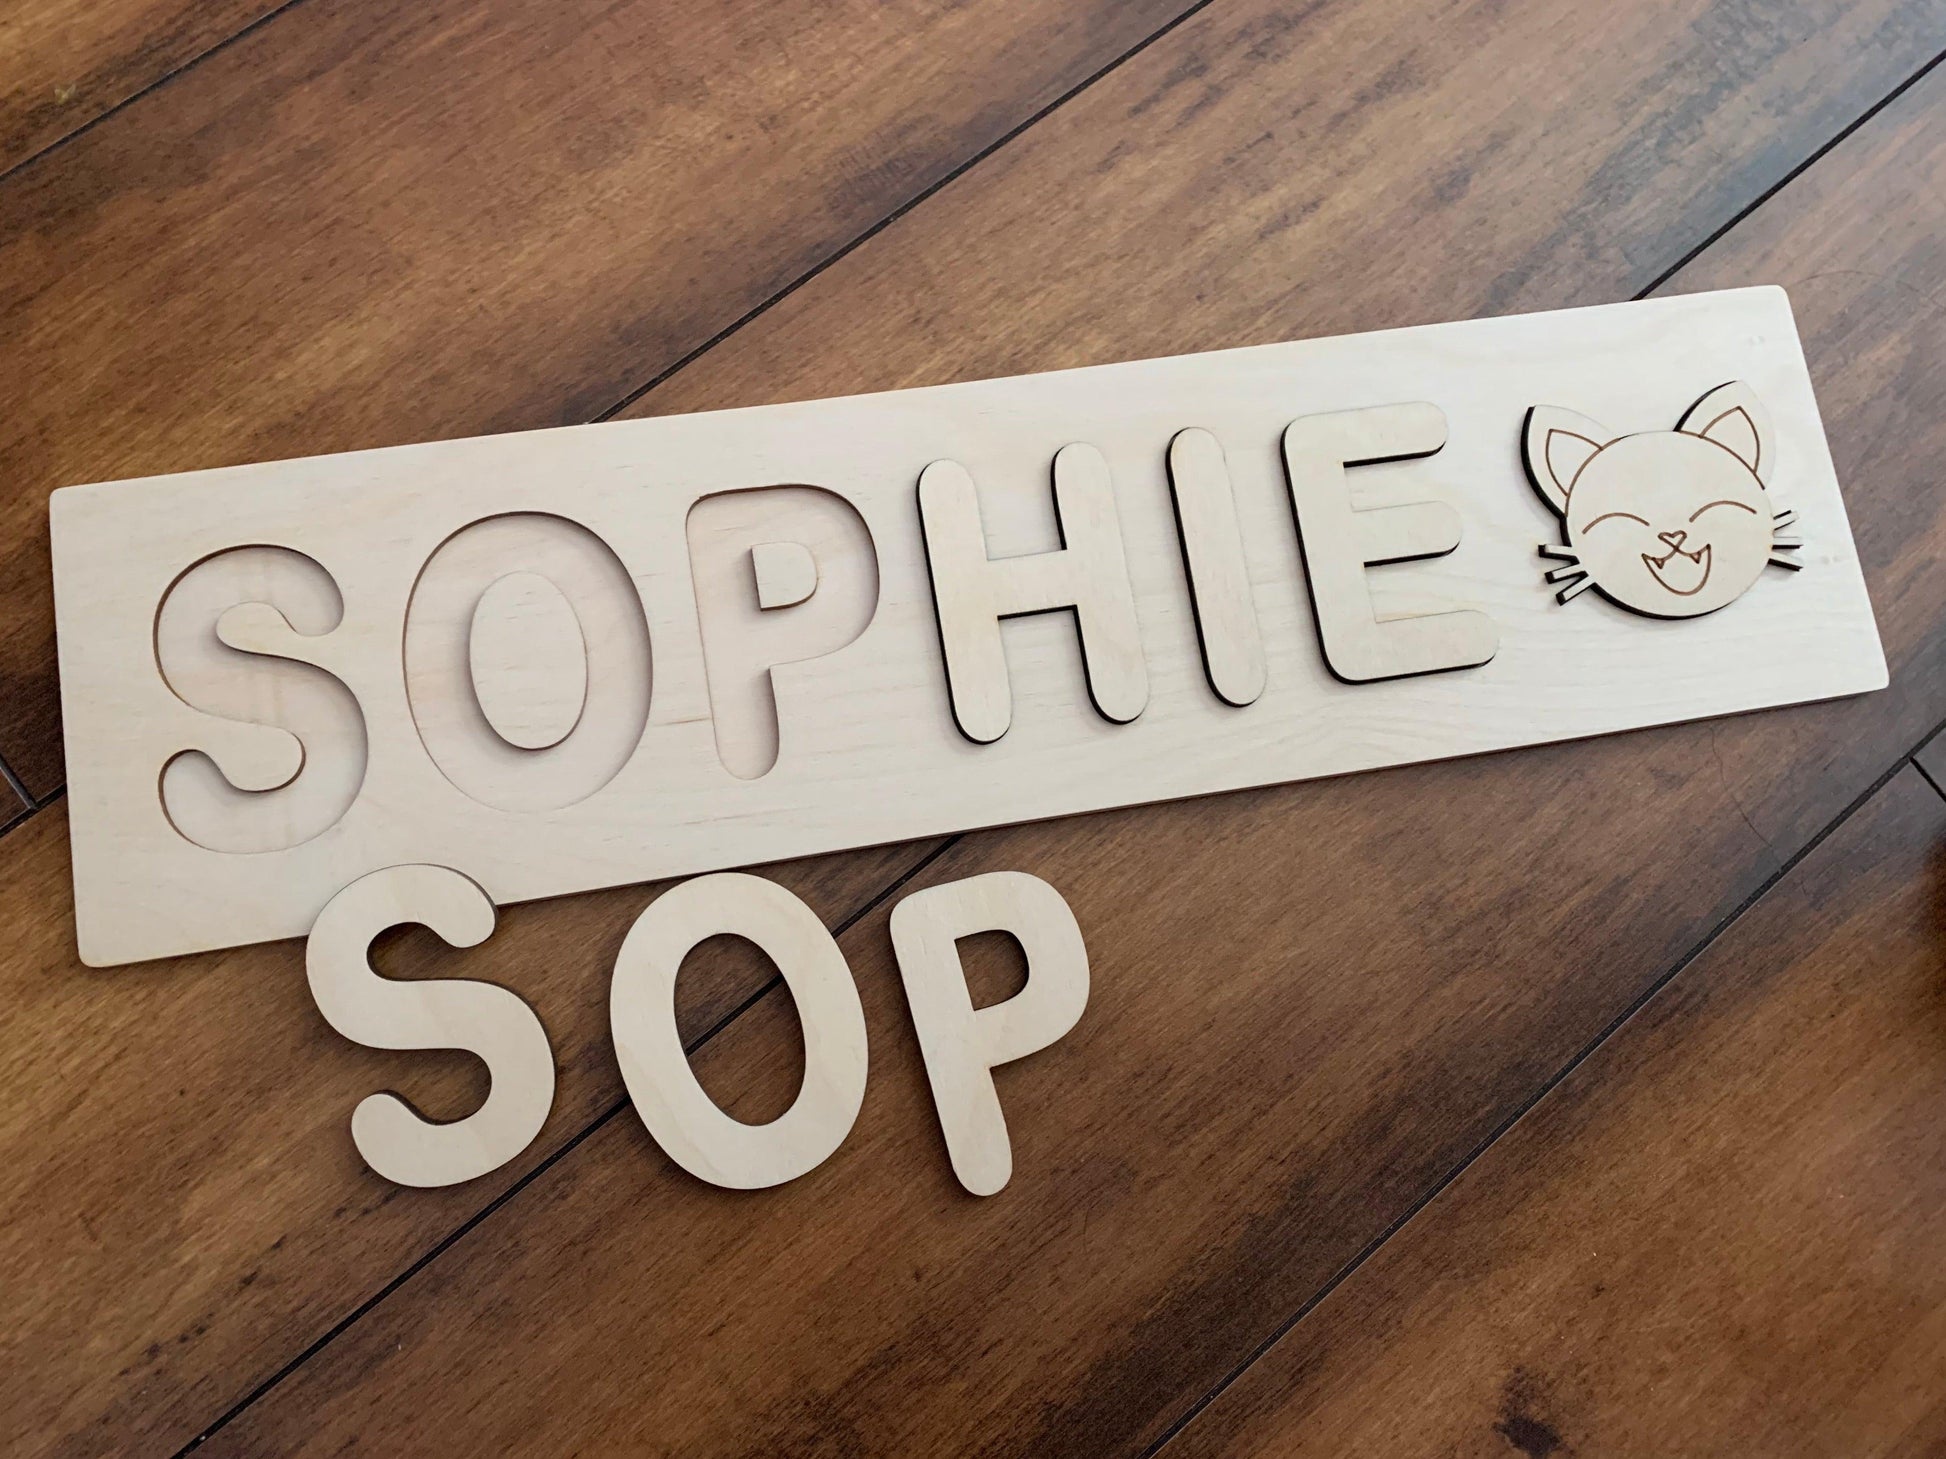 Wooden Name Plaque with Removable Pieces - Bug & Bean Decor